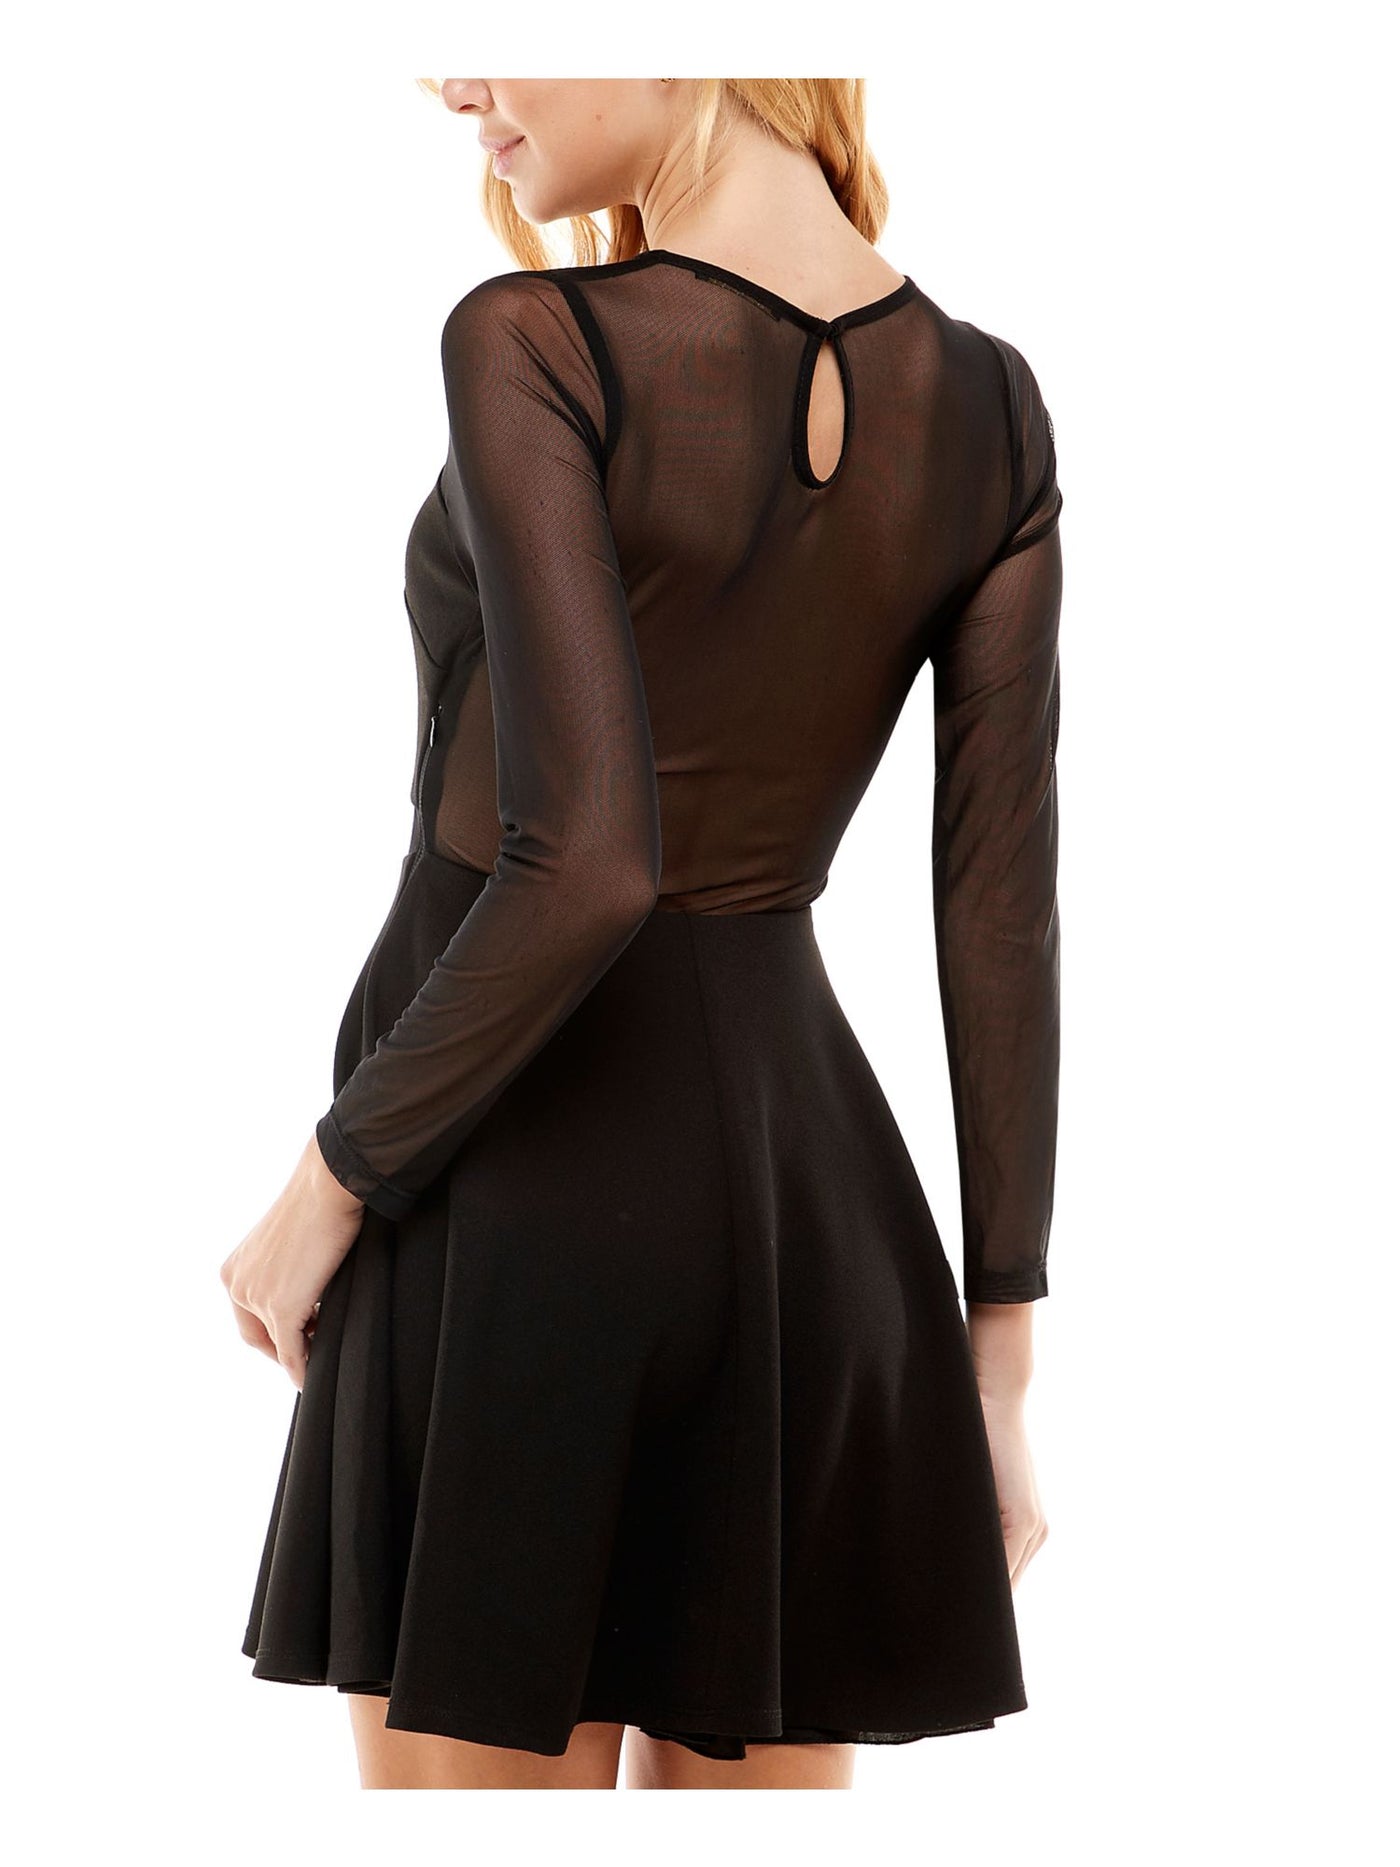 CITY STUDIO Womens Zippered Sheer Illusions Detail Long Sleeve Asymmetrical Neckline Mini Party Fit + Flare Dress